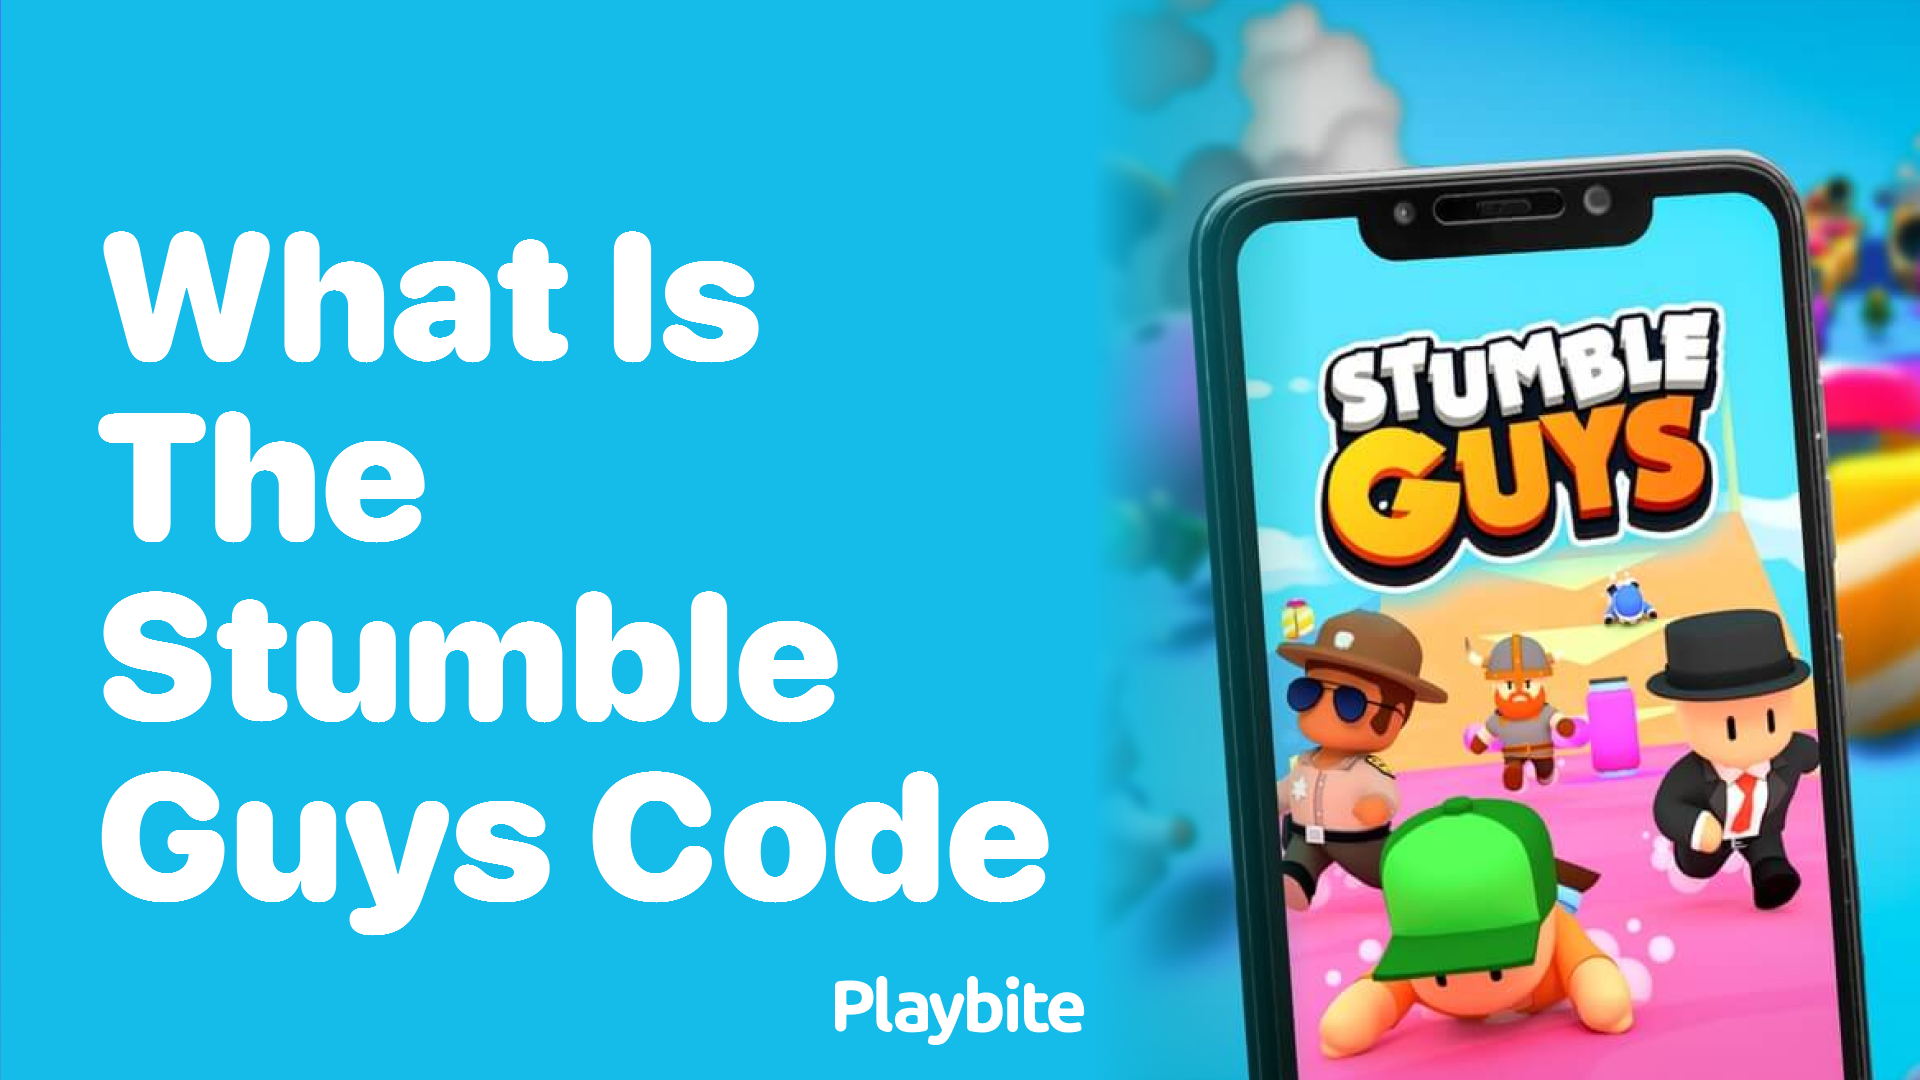 What is the Stumble Guys Code?